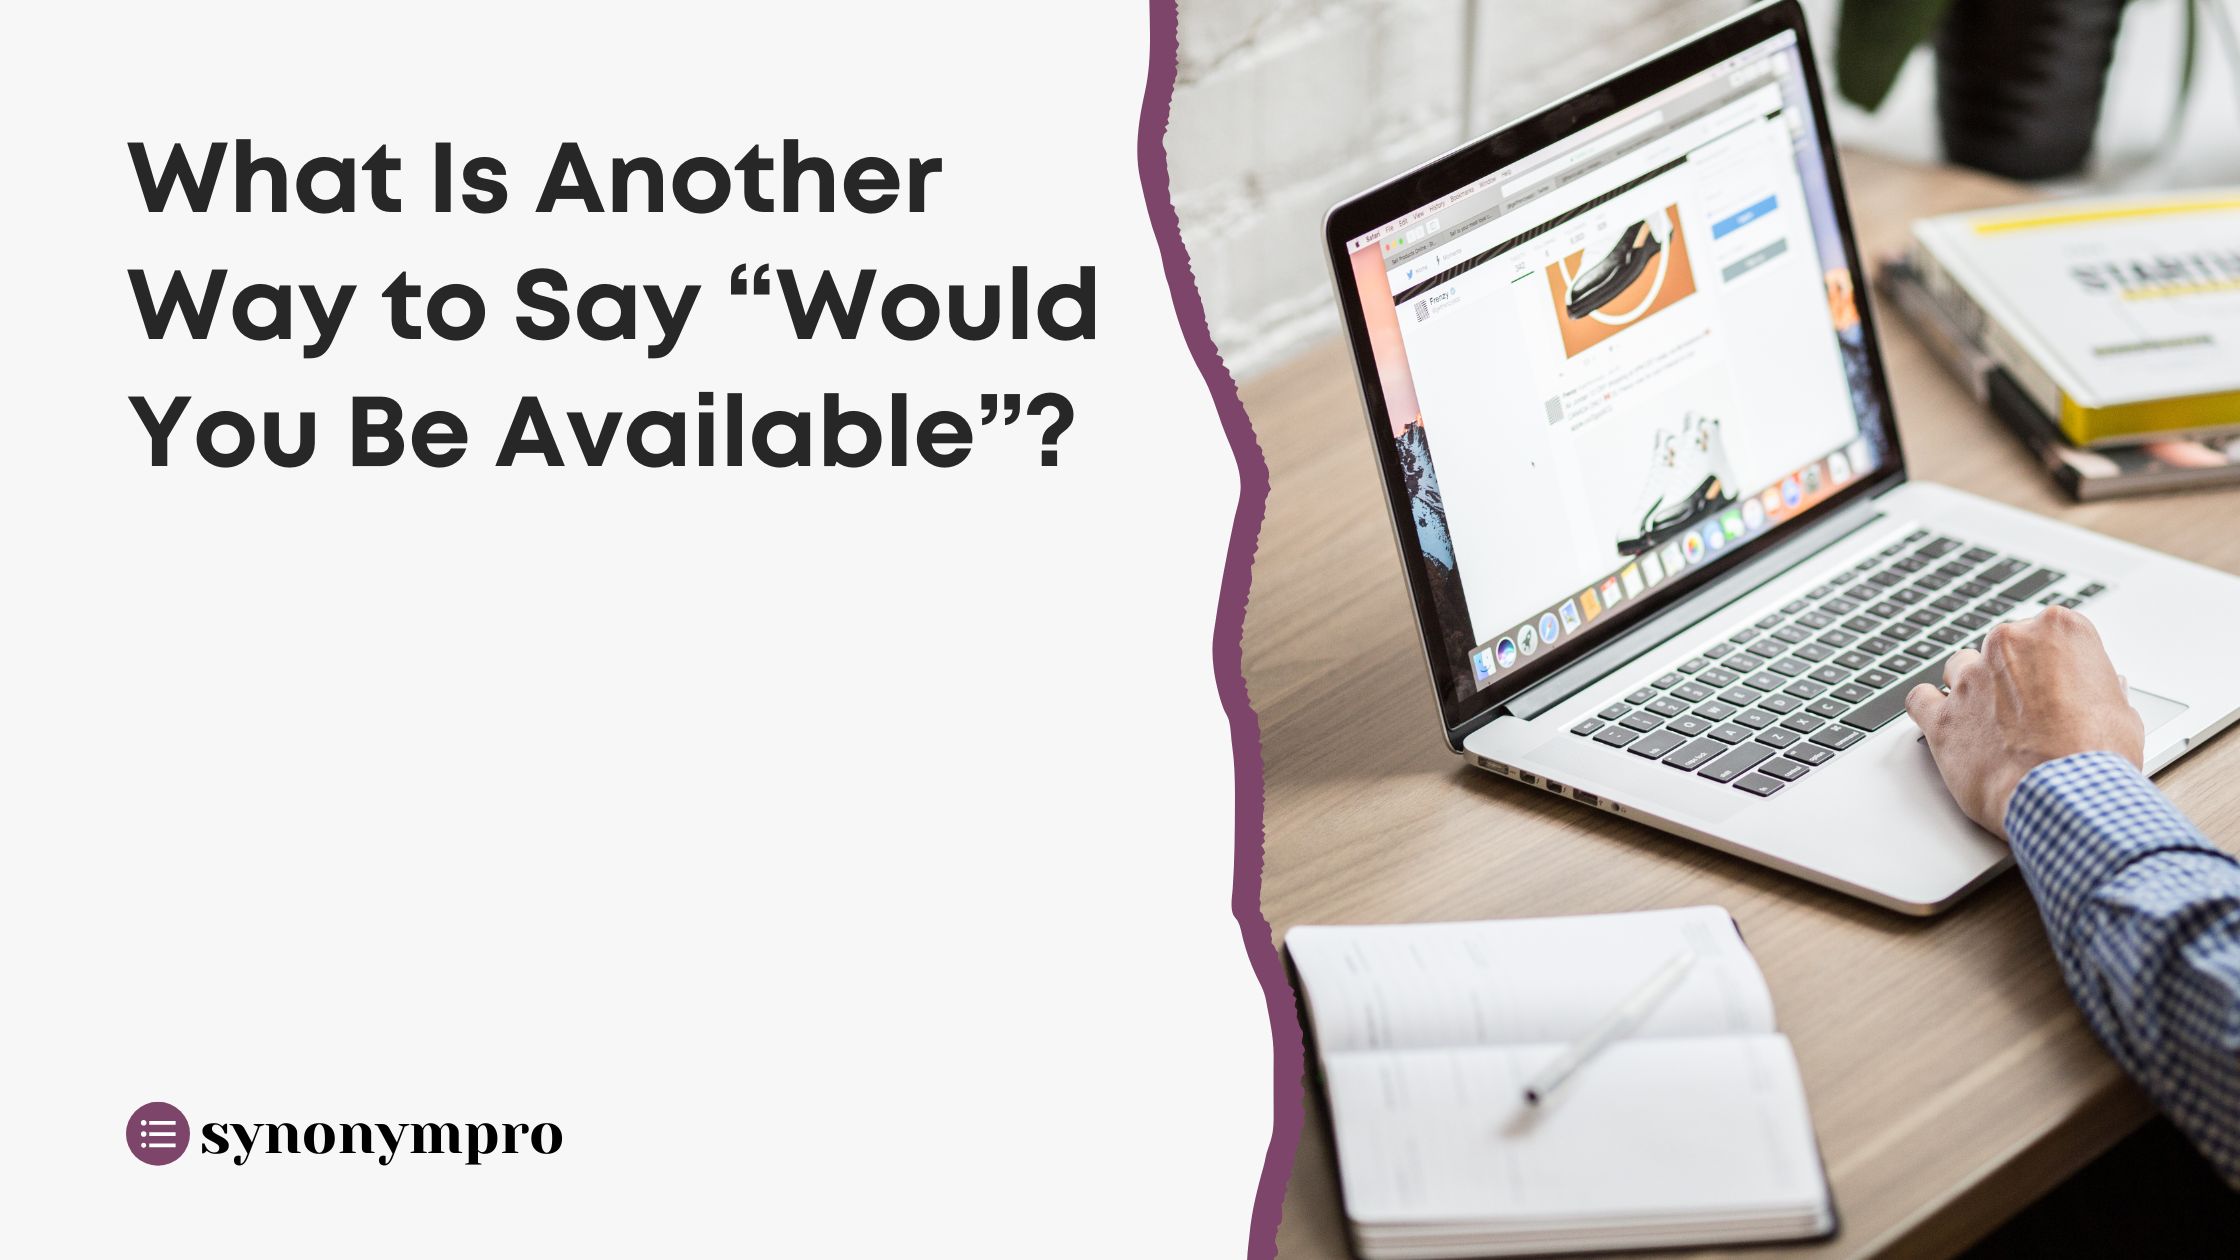 What Is Another Way To Say “would You Be Available” Synonympro